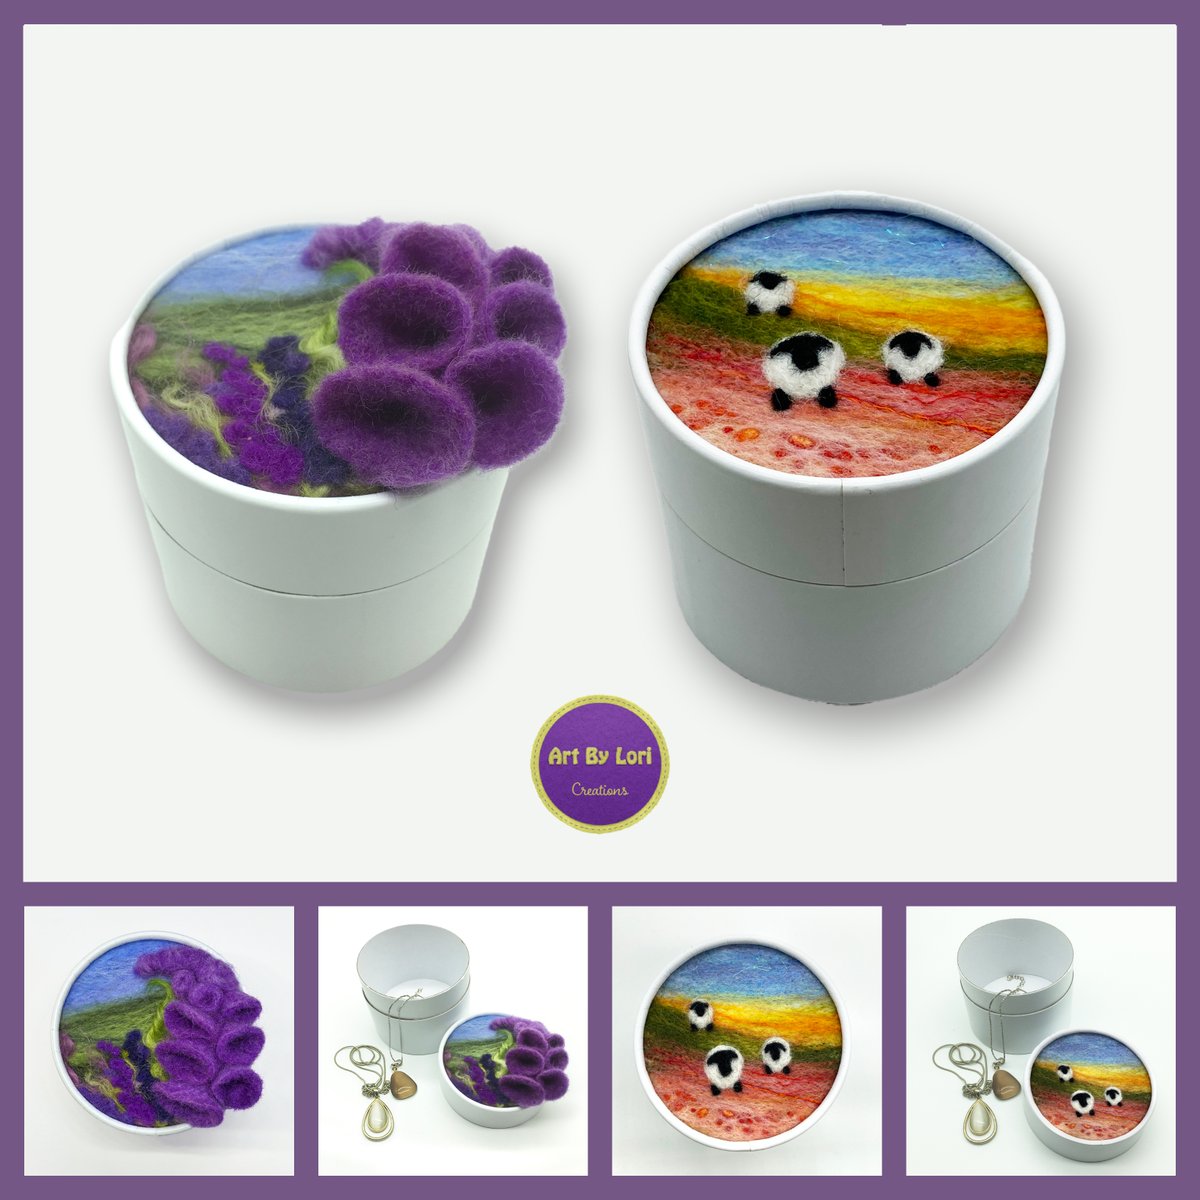 Happy Bank Holiday, bit grey here and rain 🌧 forecast for later. But these lovely trinket boxes are sure to brighten your day, available in my @BritishCrafting shop. Have a fab day ❤️ thebritishcrafthouse.co.uk/shop-category/… #tbch #trinketbox #needlefelting #nature